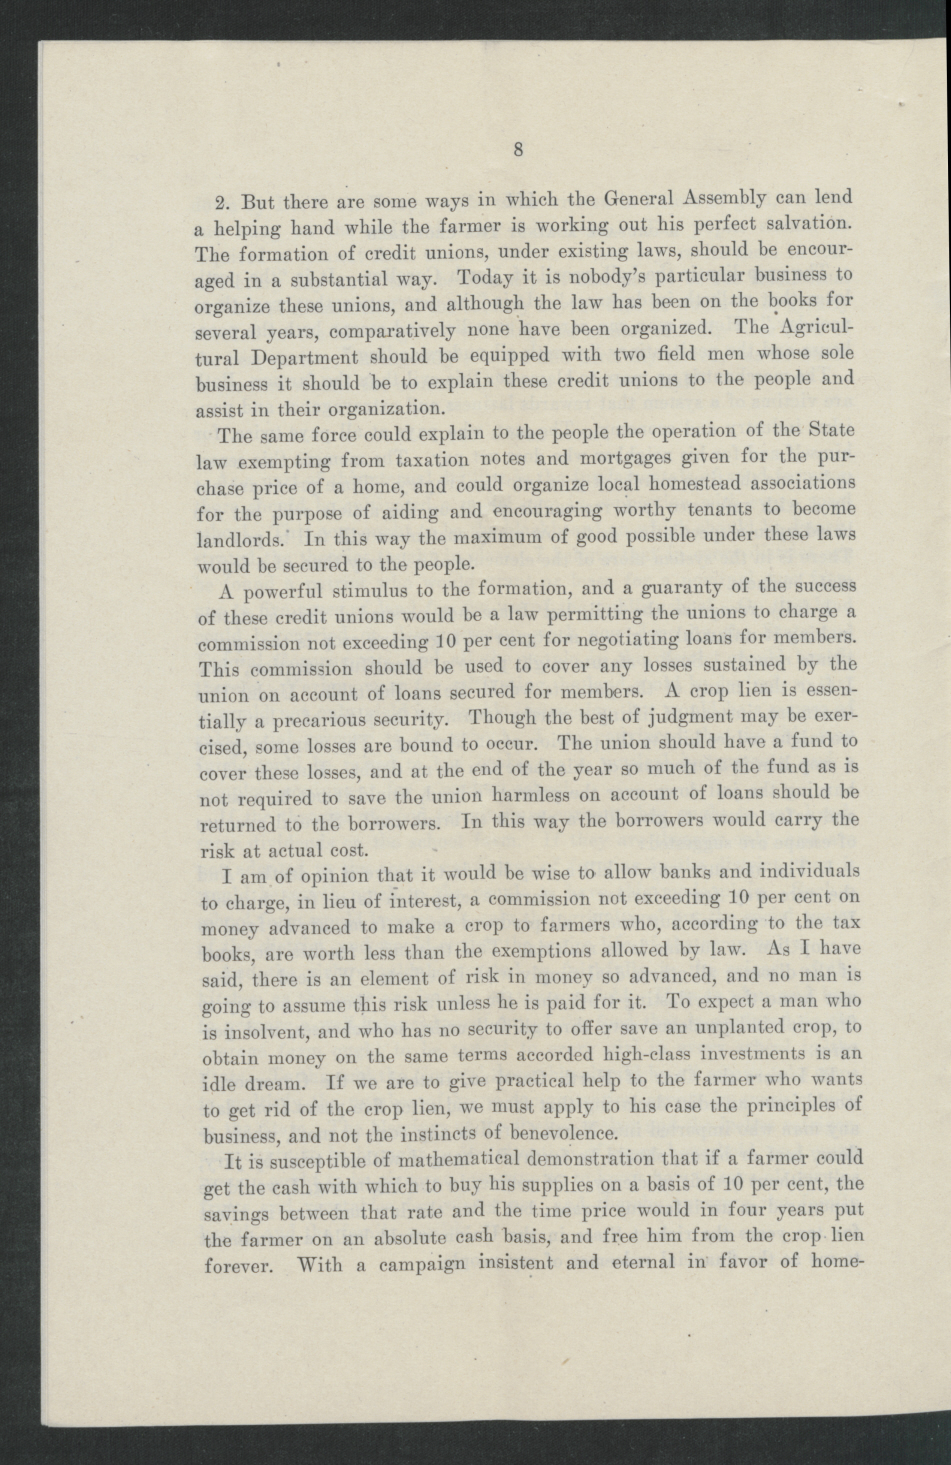 Inaugural Address of Governor Thomas W. Bickett to the General Assembly, January 11, 1917, page 6